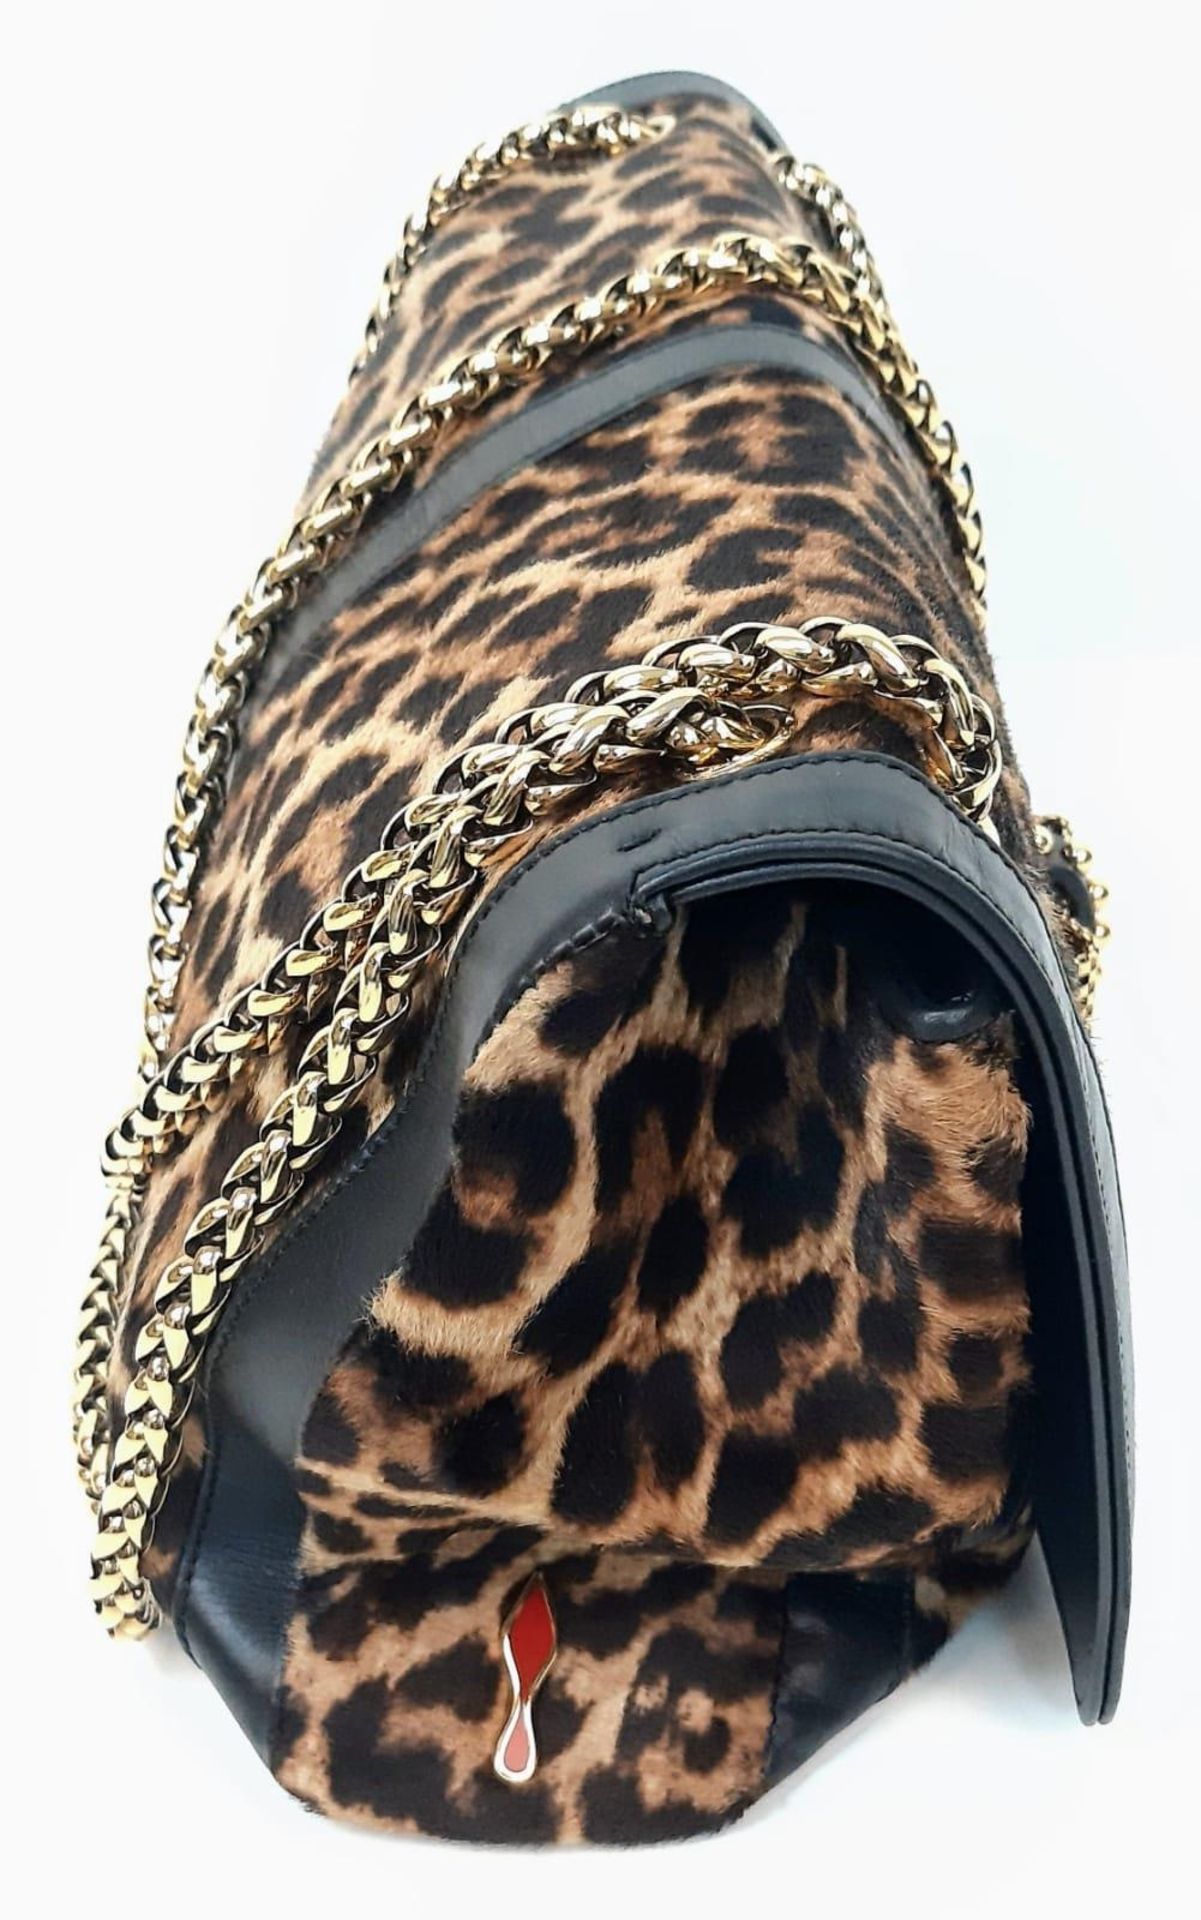 A Christian Louboutin Sweet Charity Leather and Leopard Print Pony Hair Shoulder Bag. Gold tone - Image 4 of 6